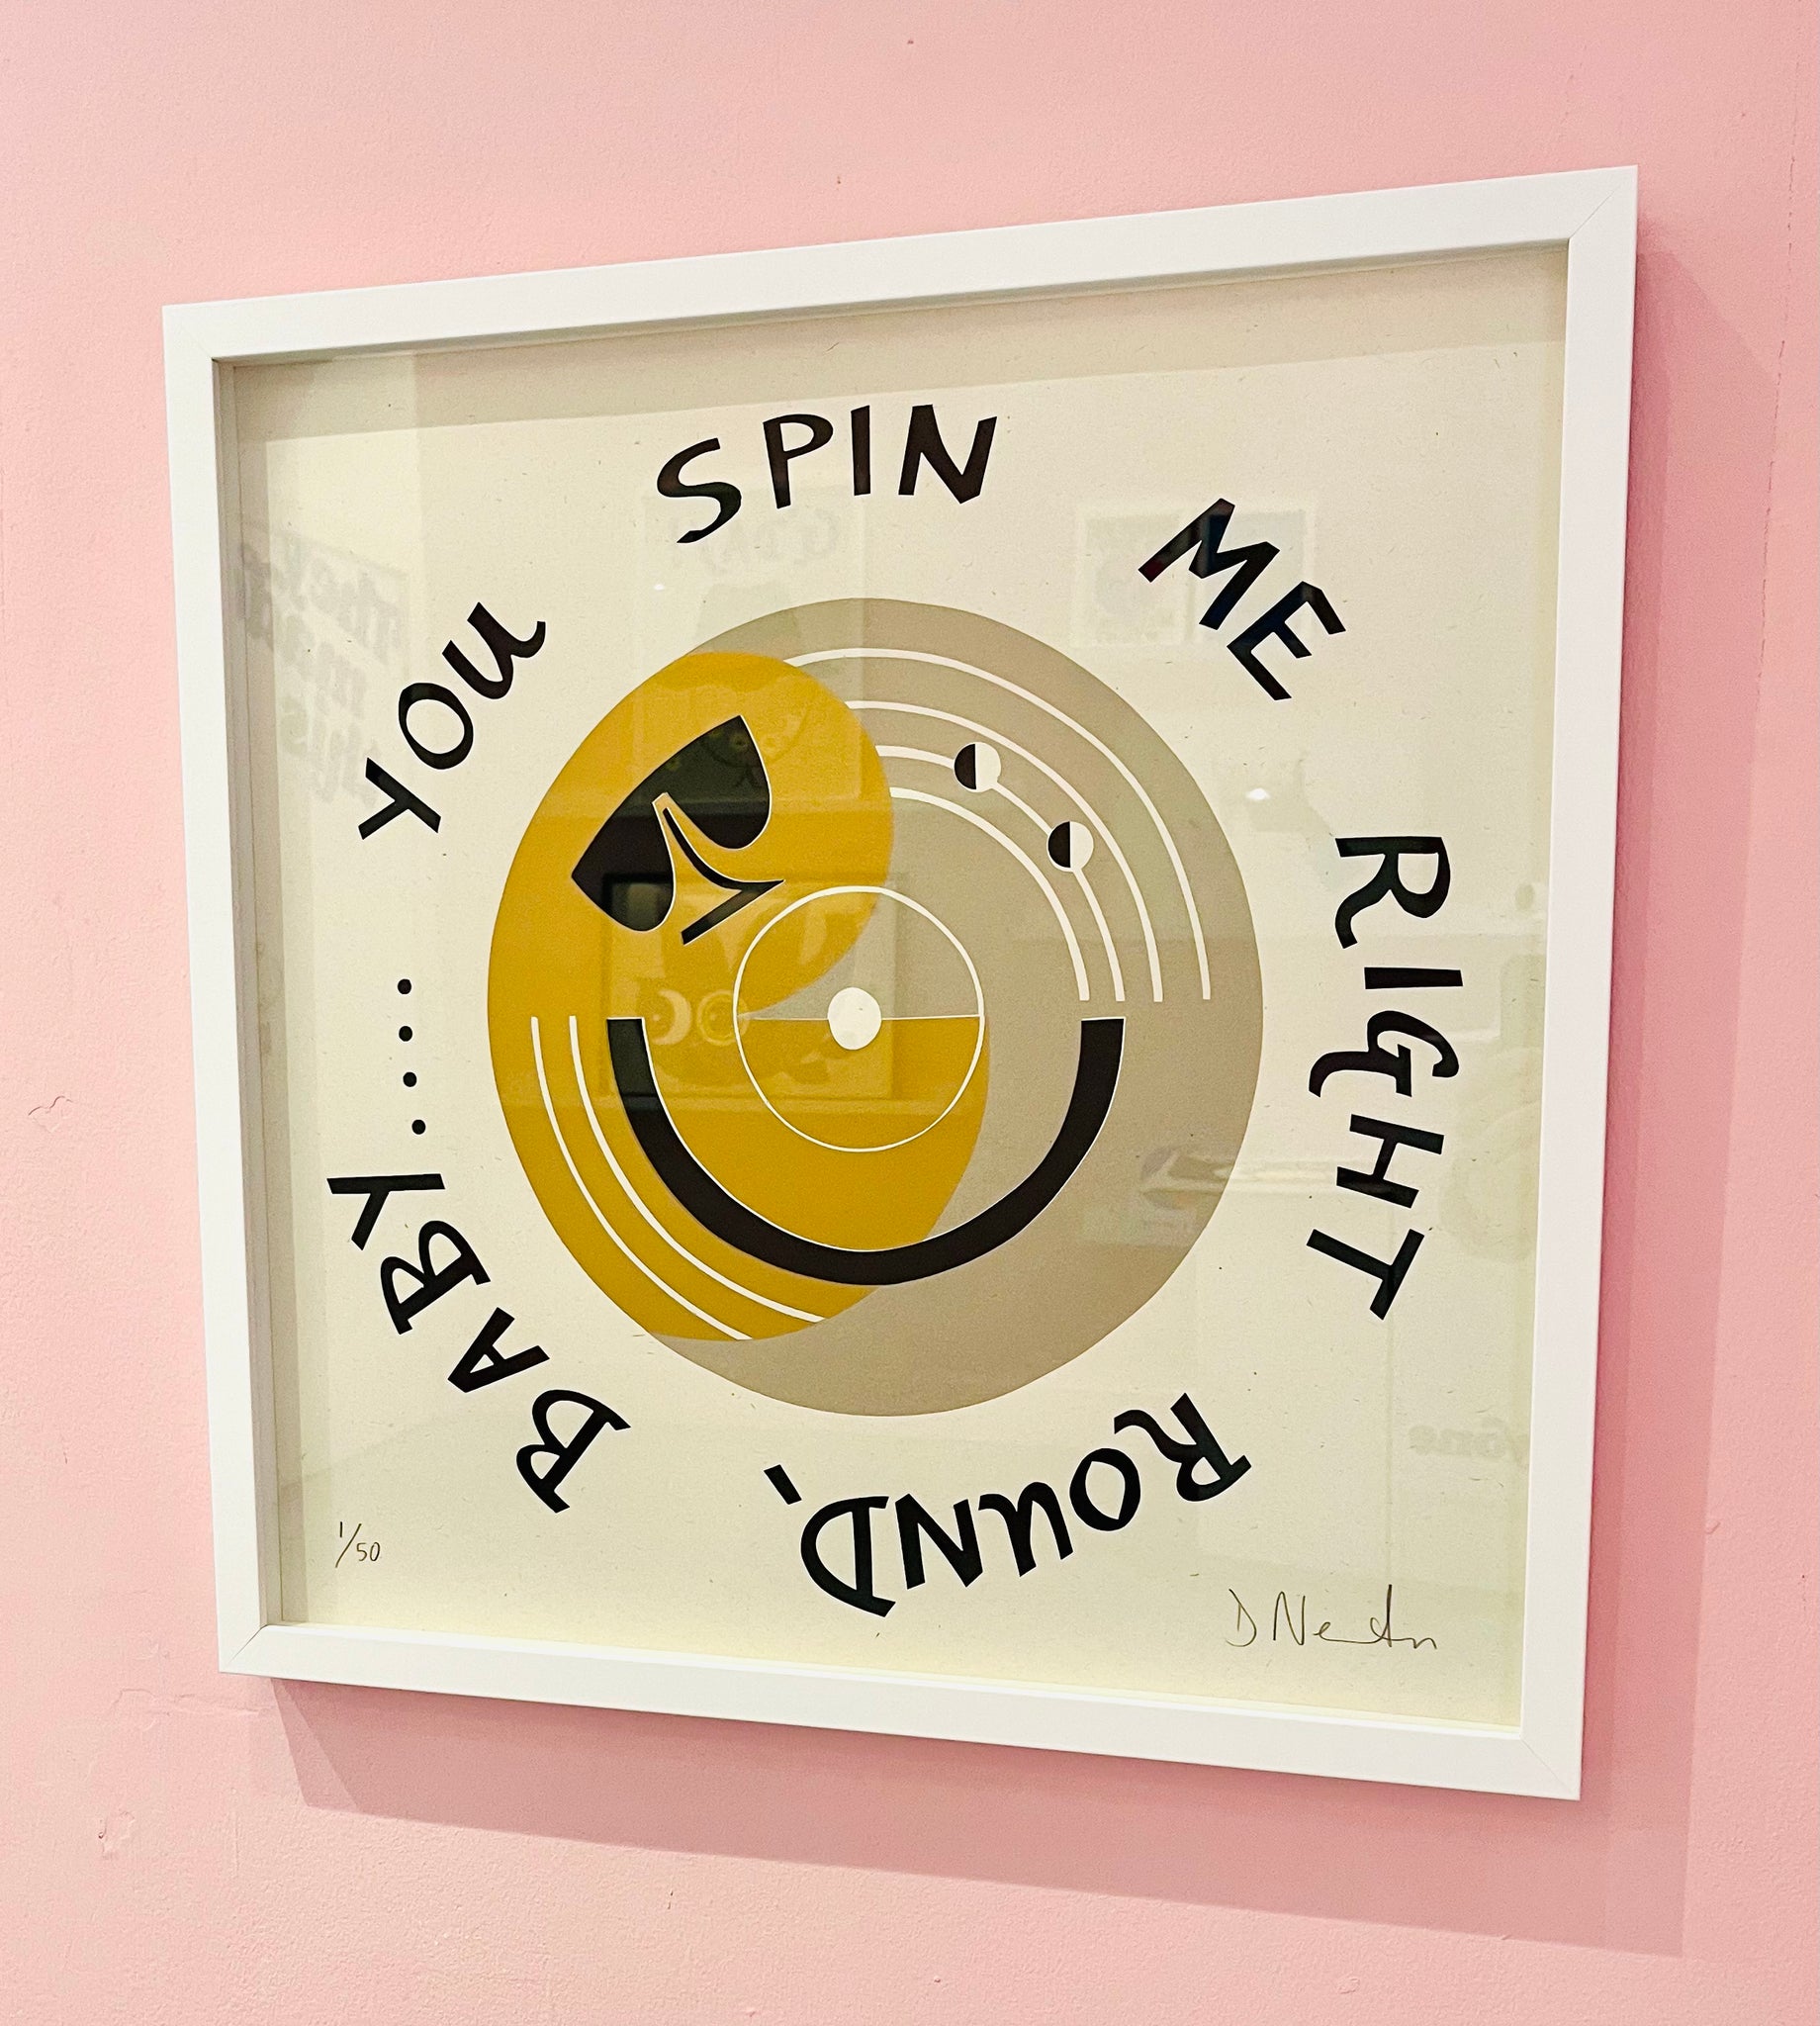 YOU SPIN ME AROUND